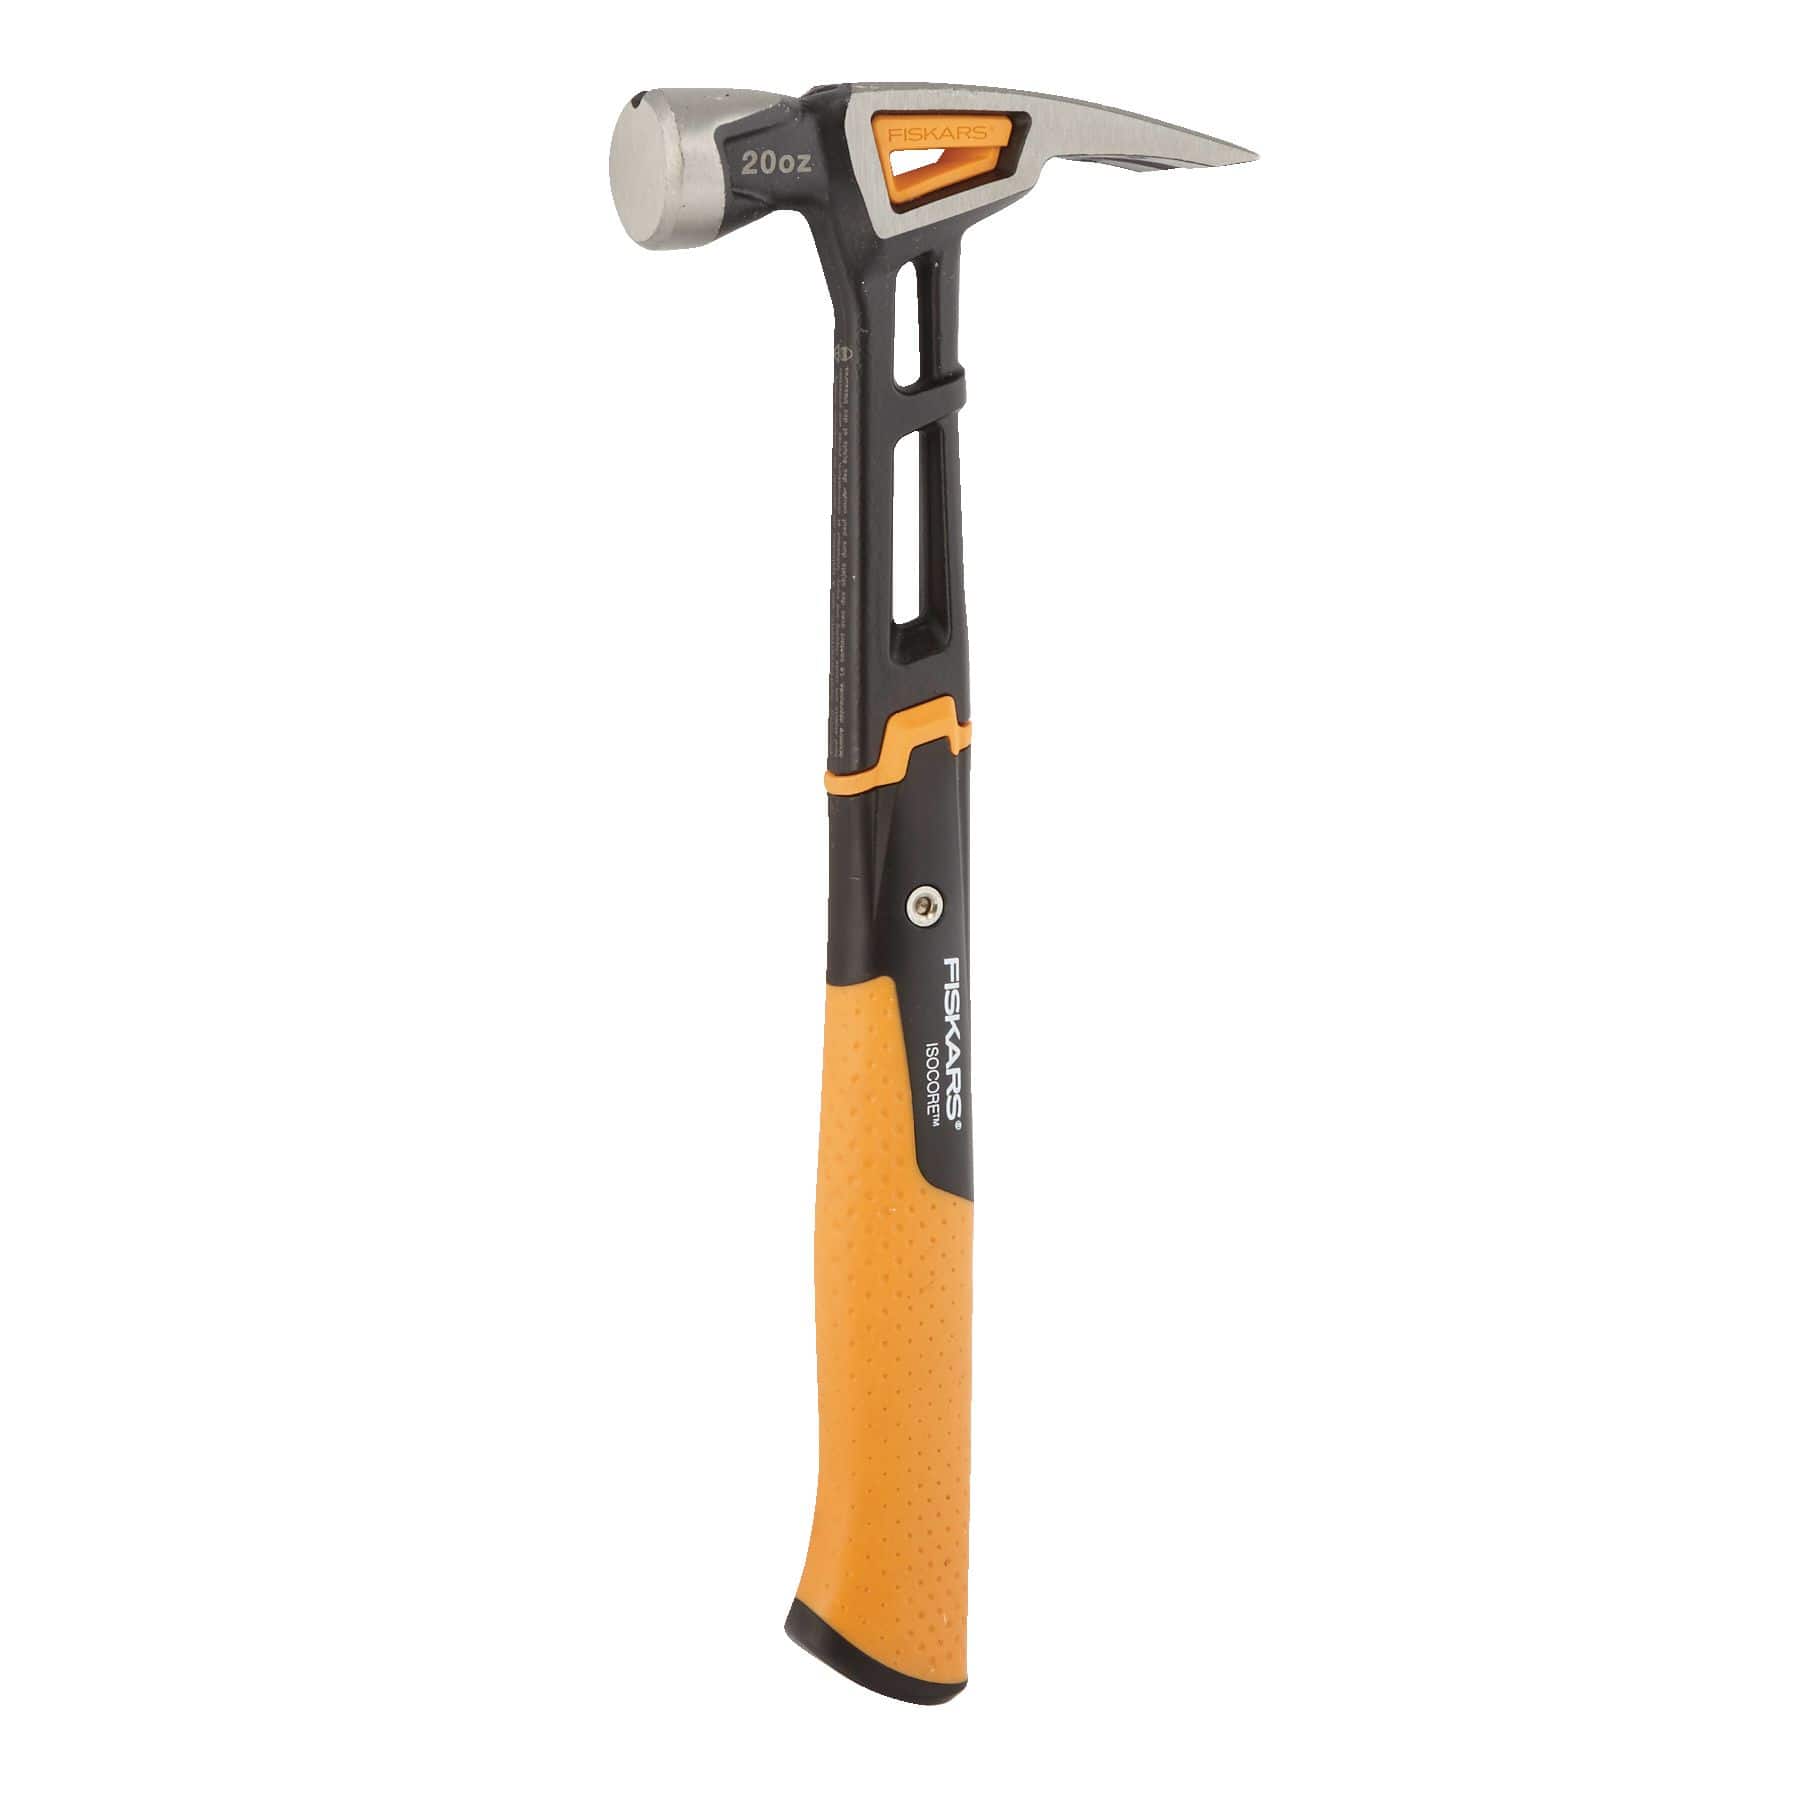 Fiskars IsoCore Claw Finishing Hammer, Smooth Steel Face, 20-oz